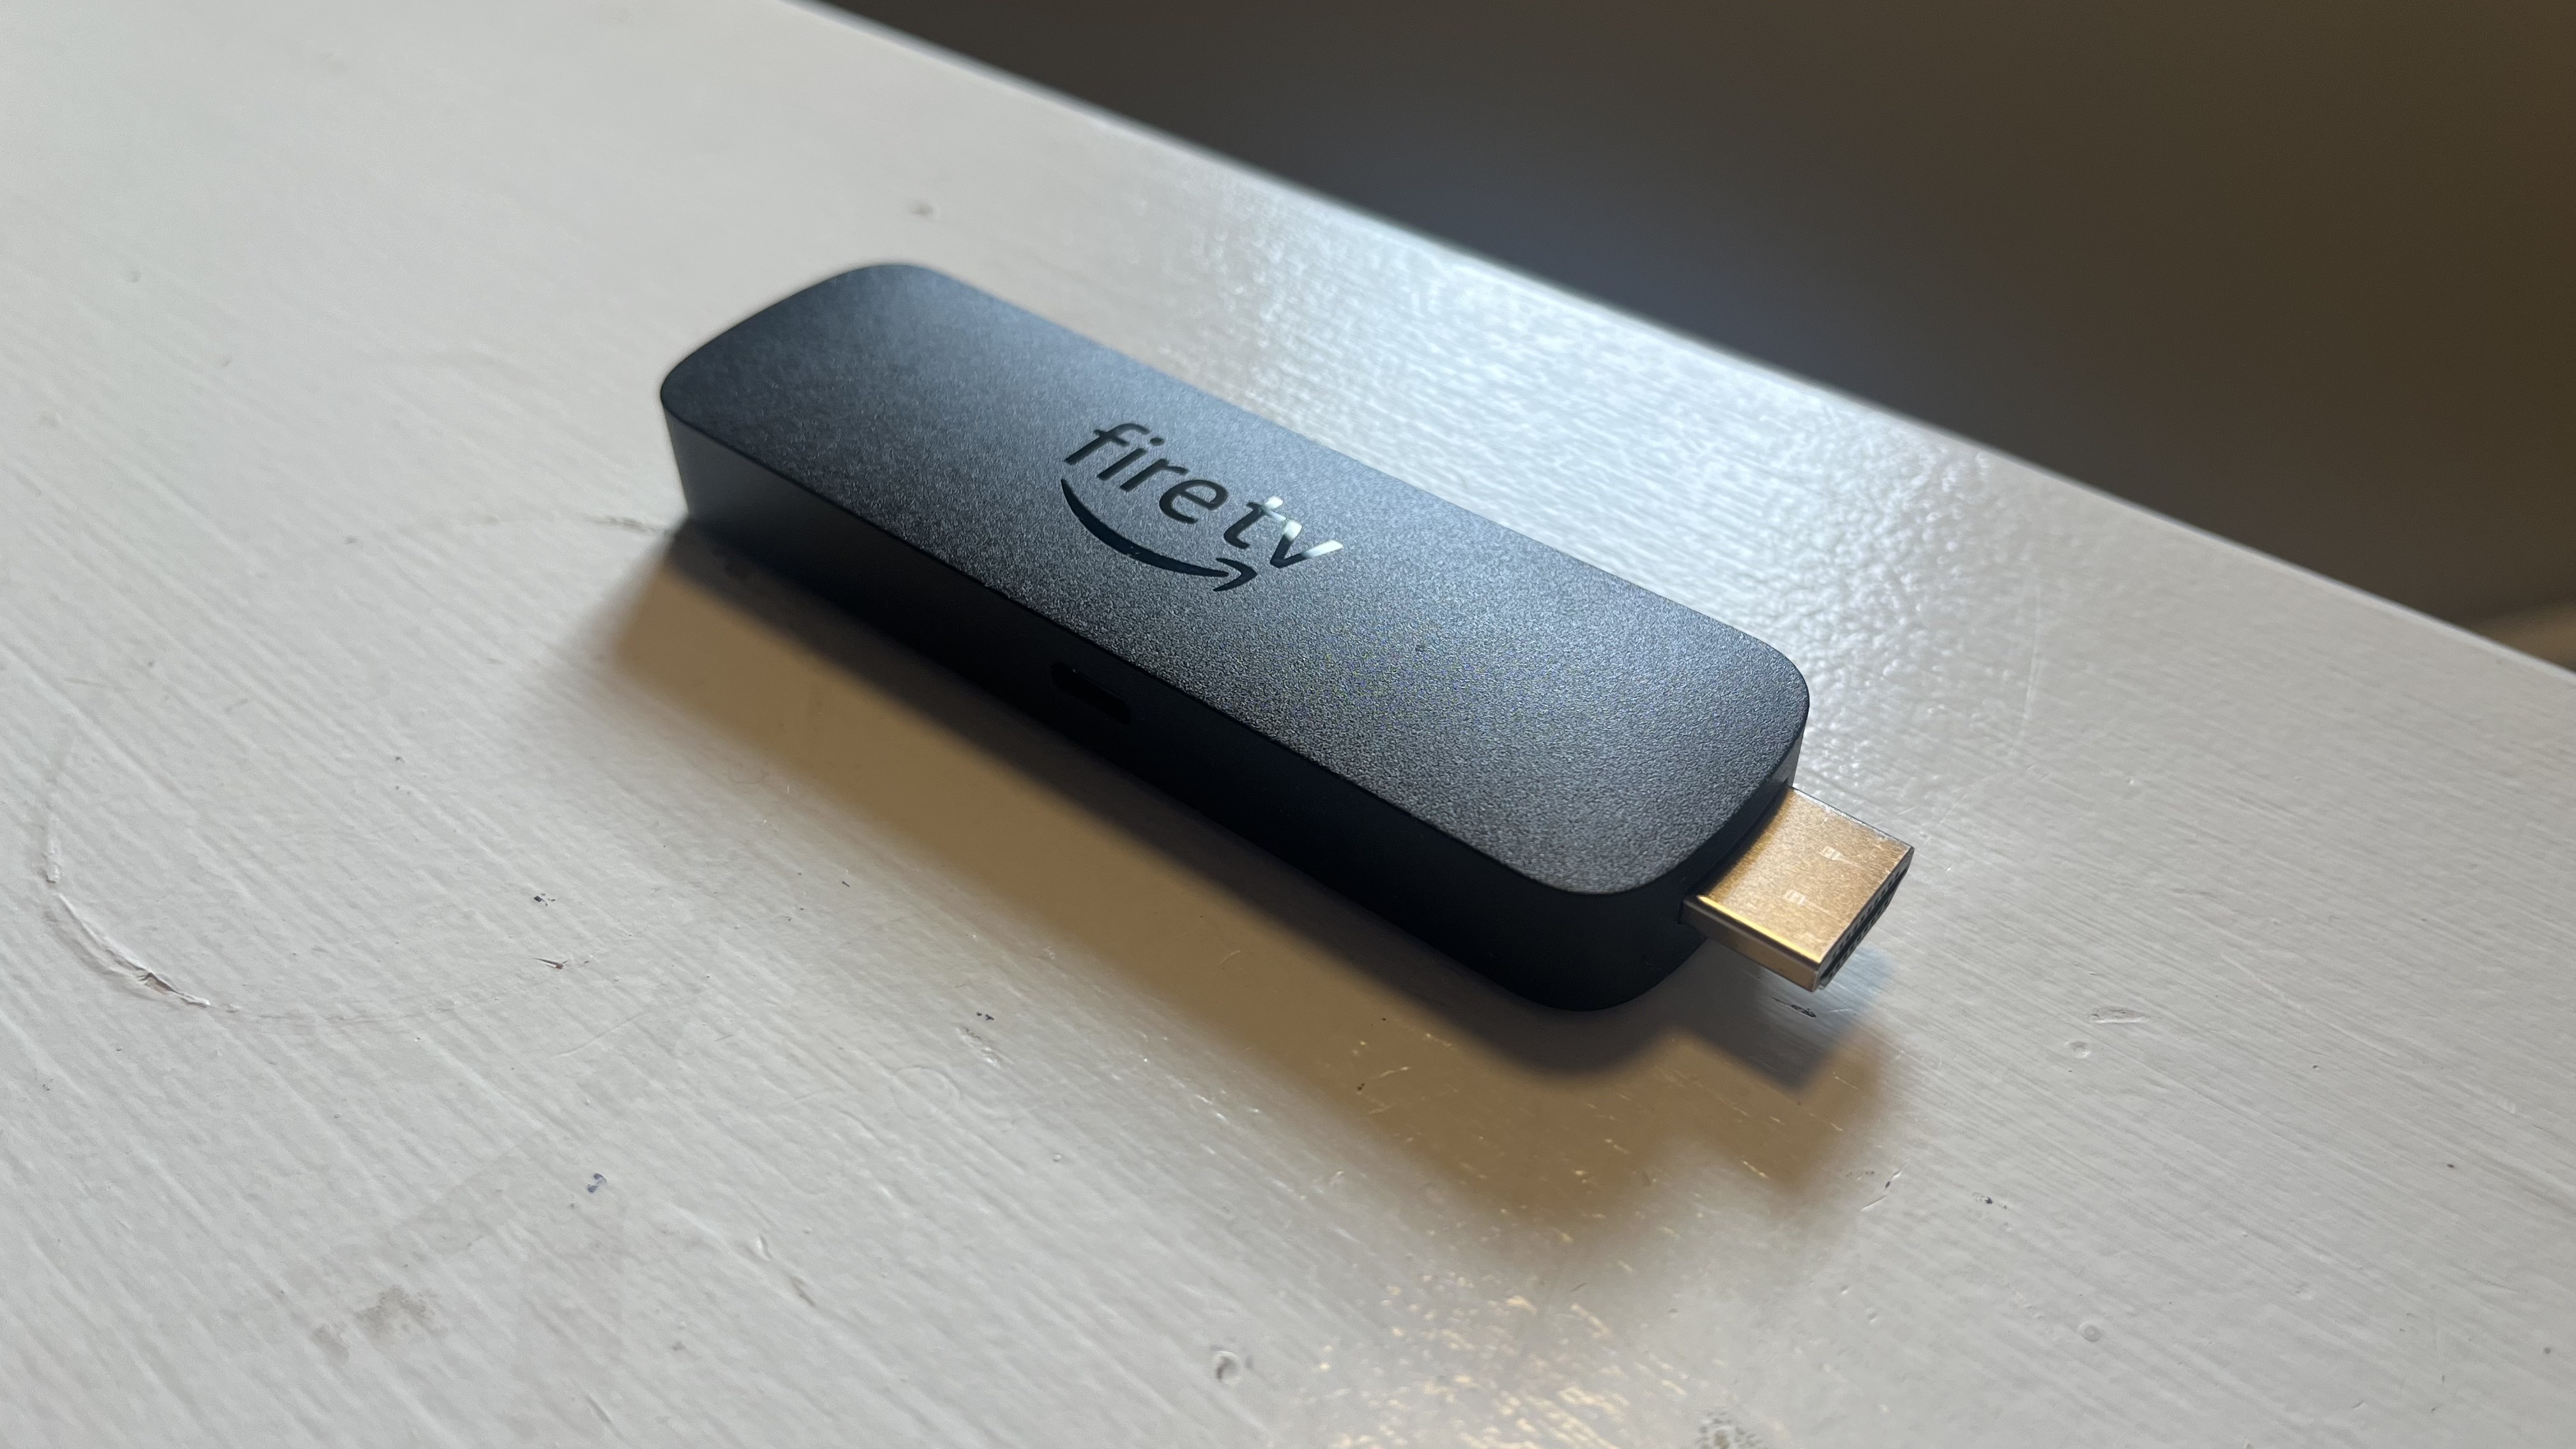 Fire TV Stick 4K Max (2023) review: Storage makes a difference